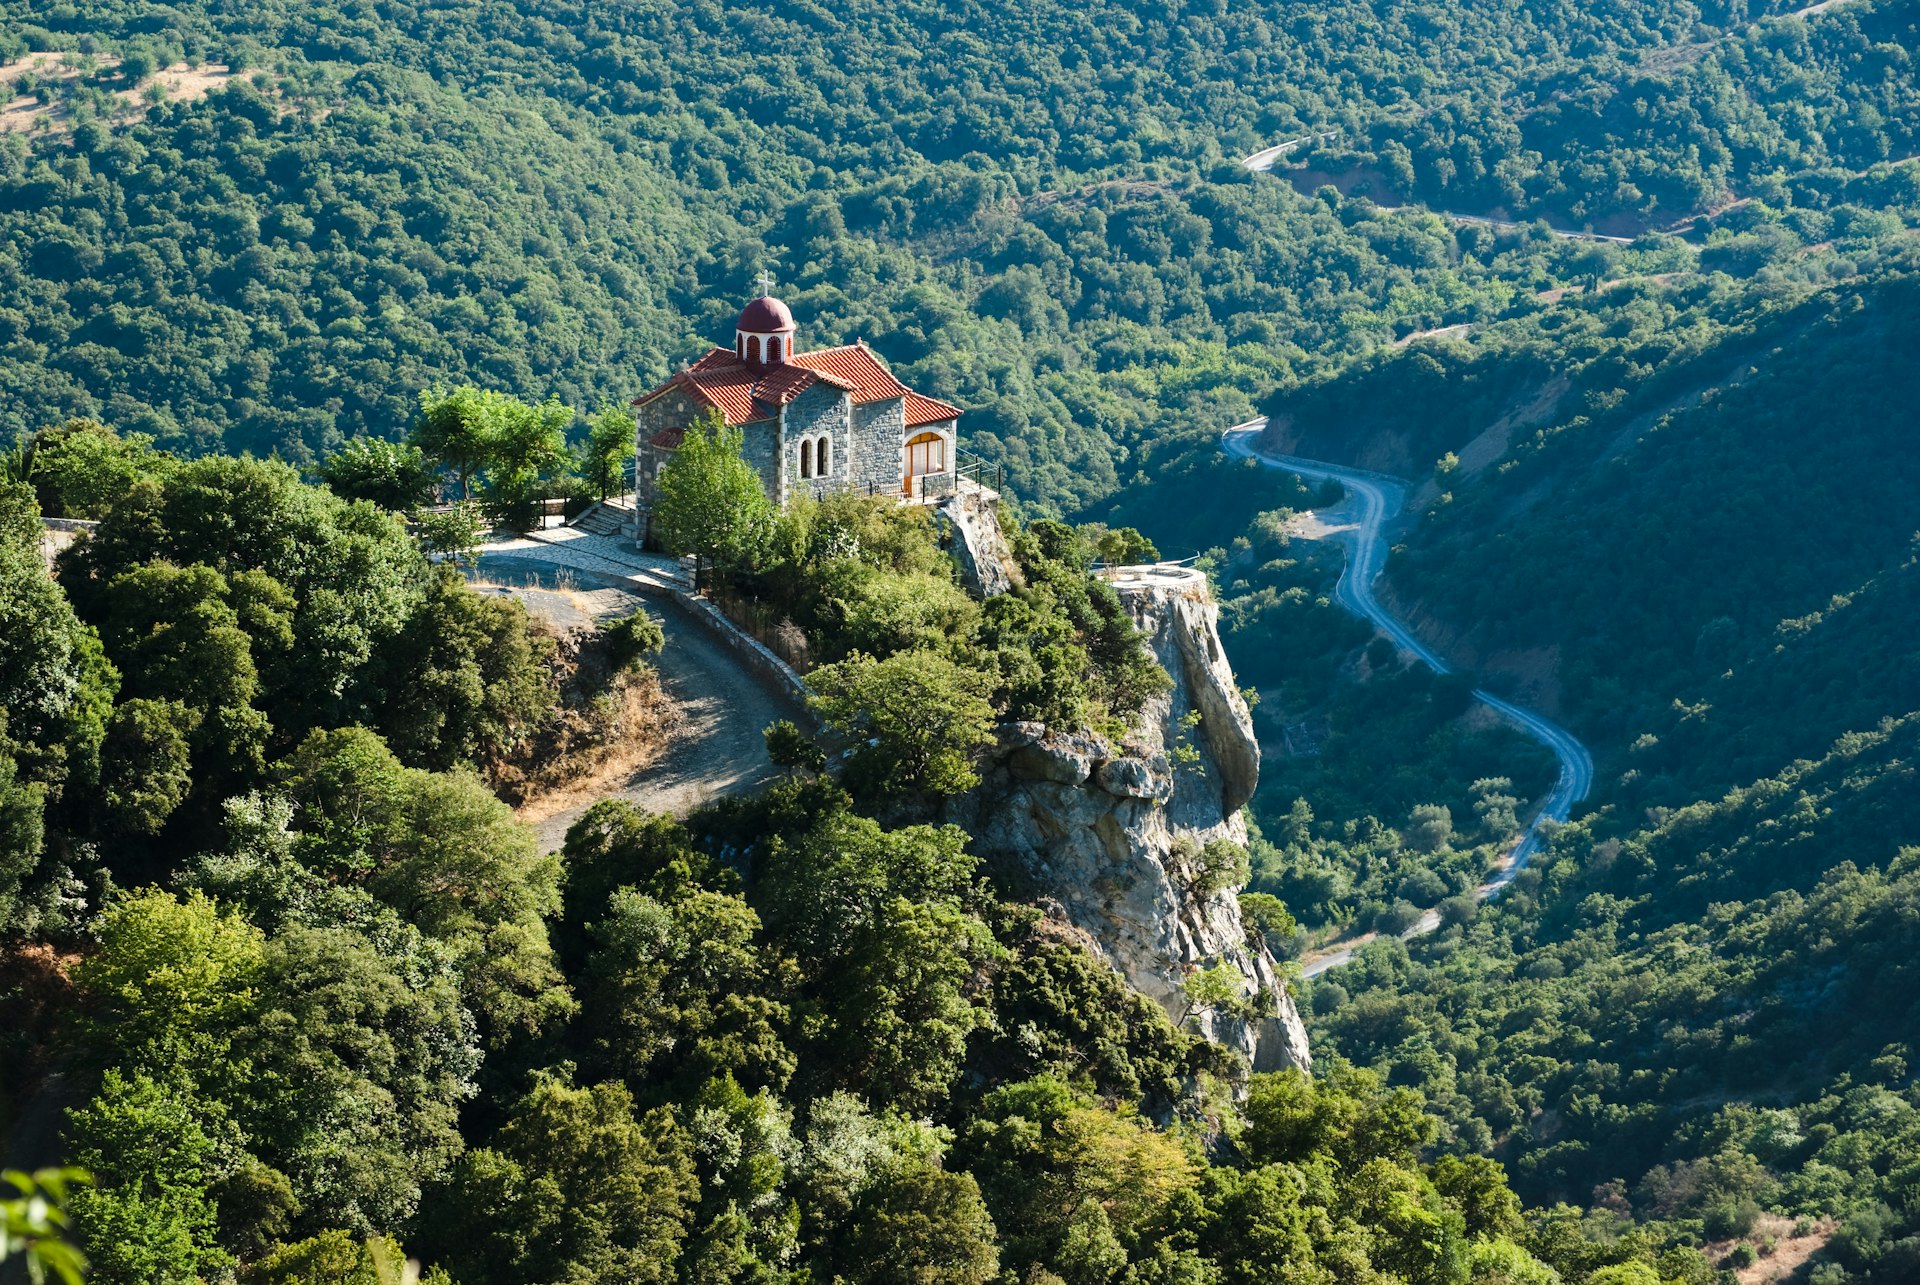 A river winding through a lush green valley with an ancient red-roofed church on clifftop